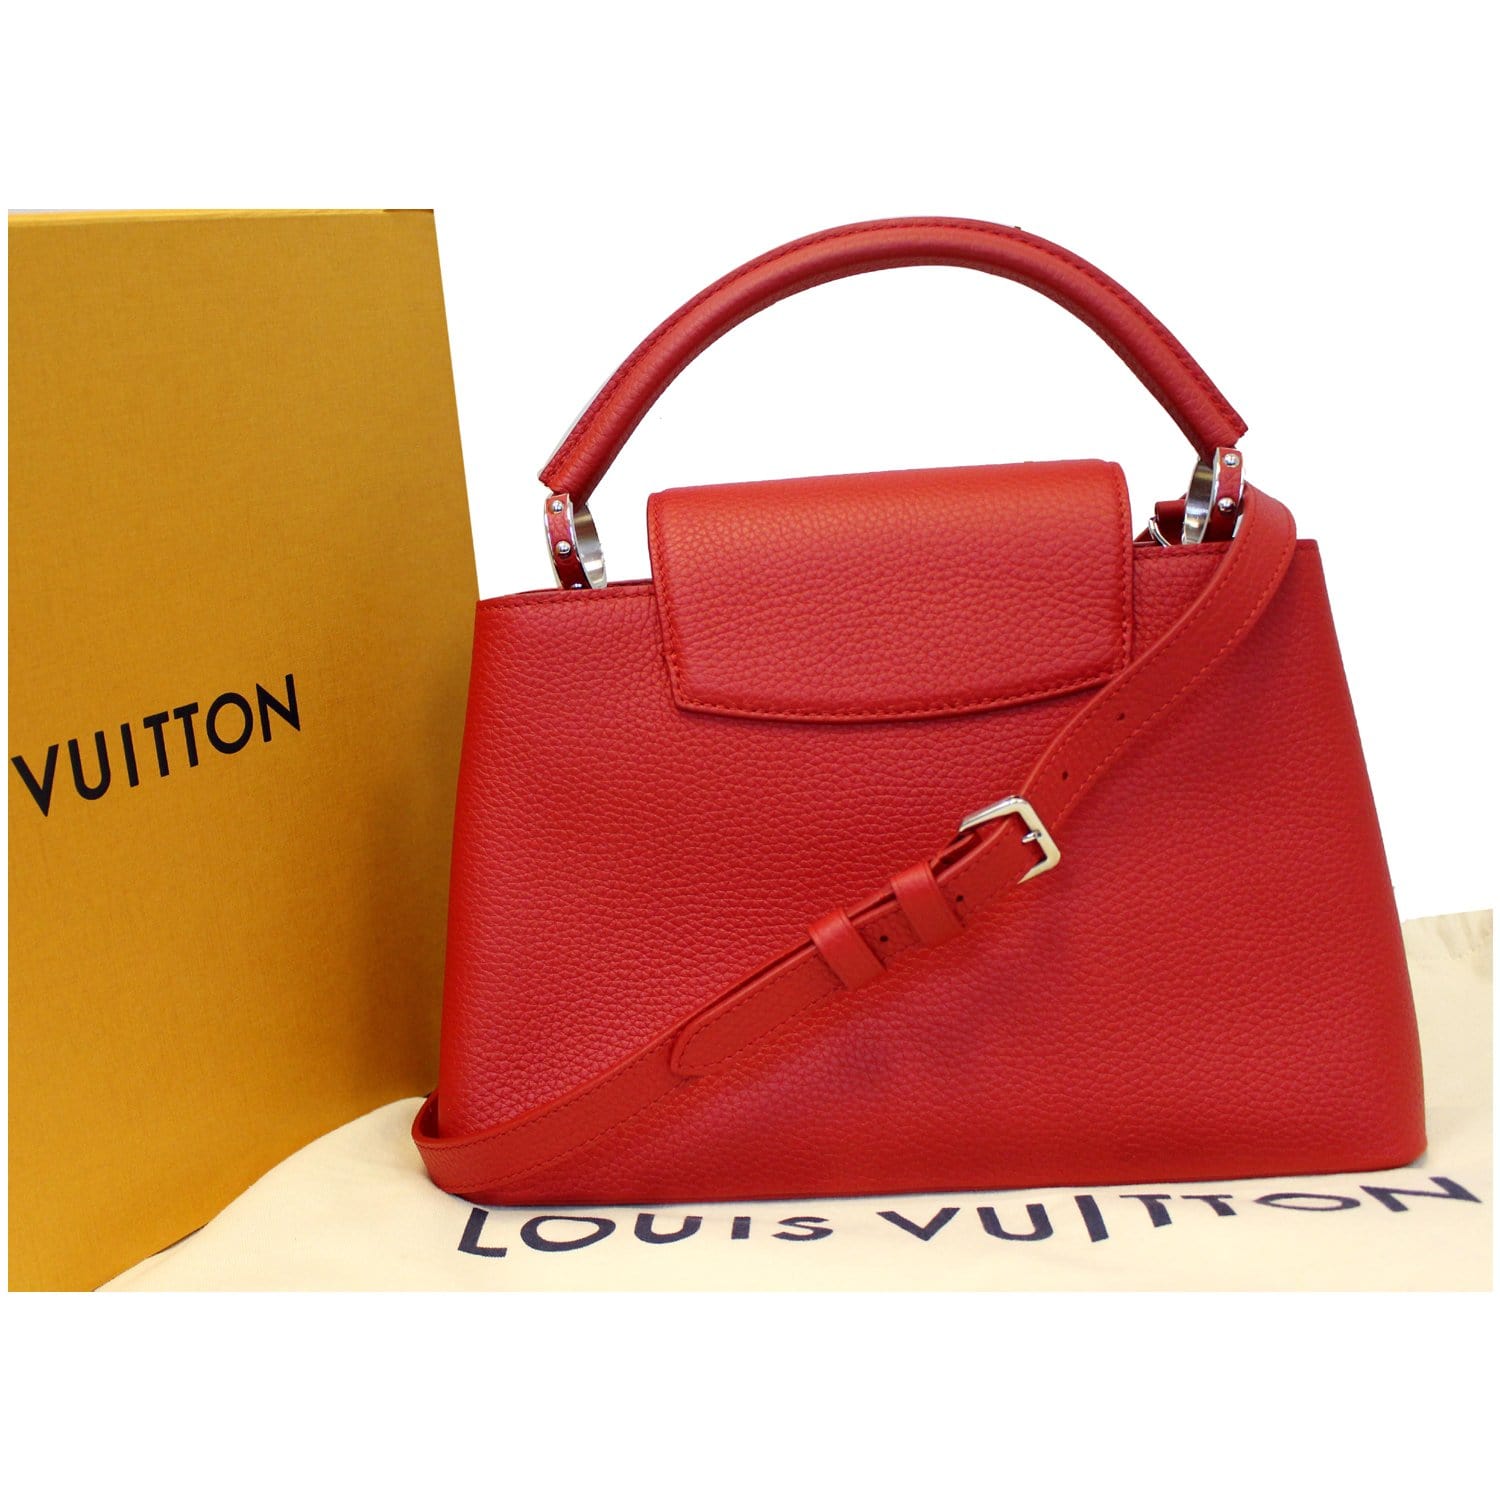 Capucines leather handbag Louis Vuitton Brown in Leather - 30685371